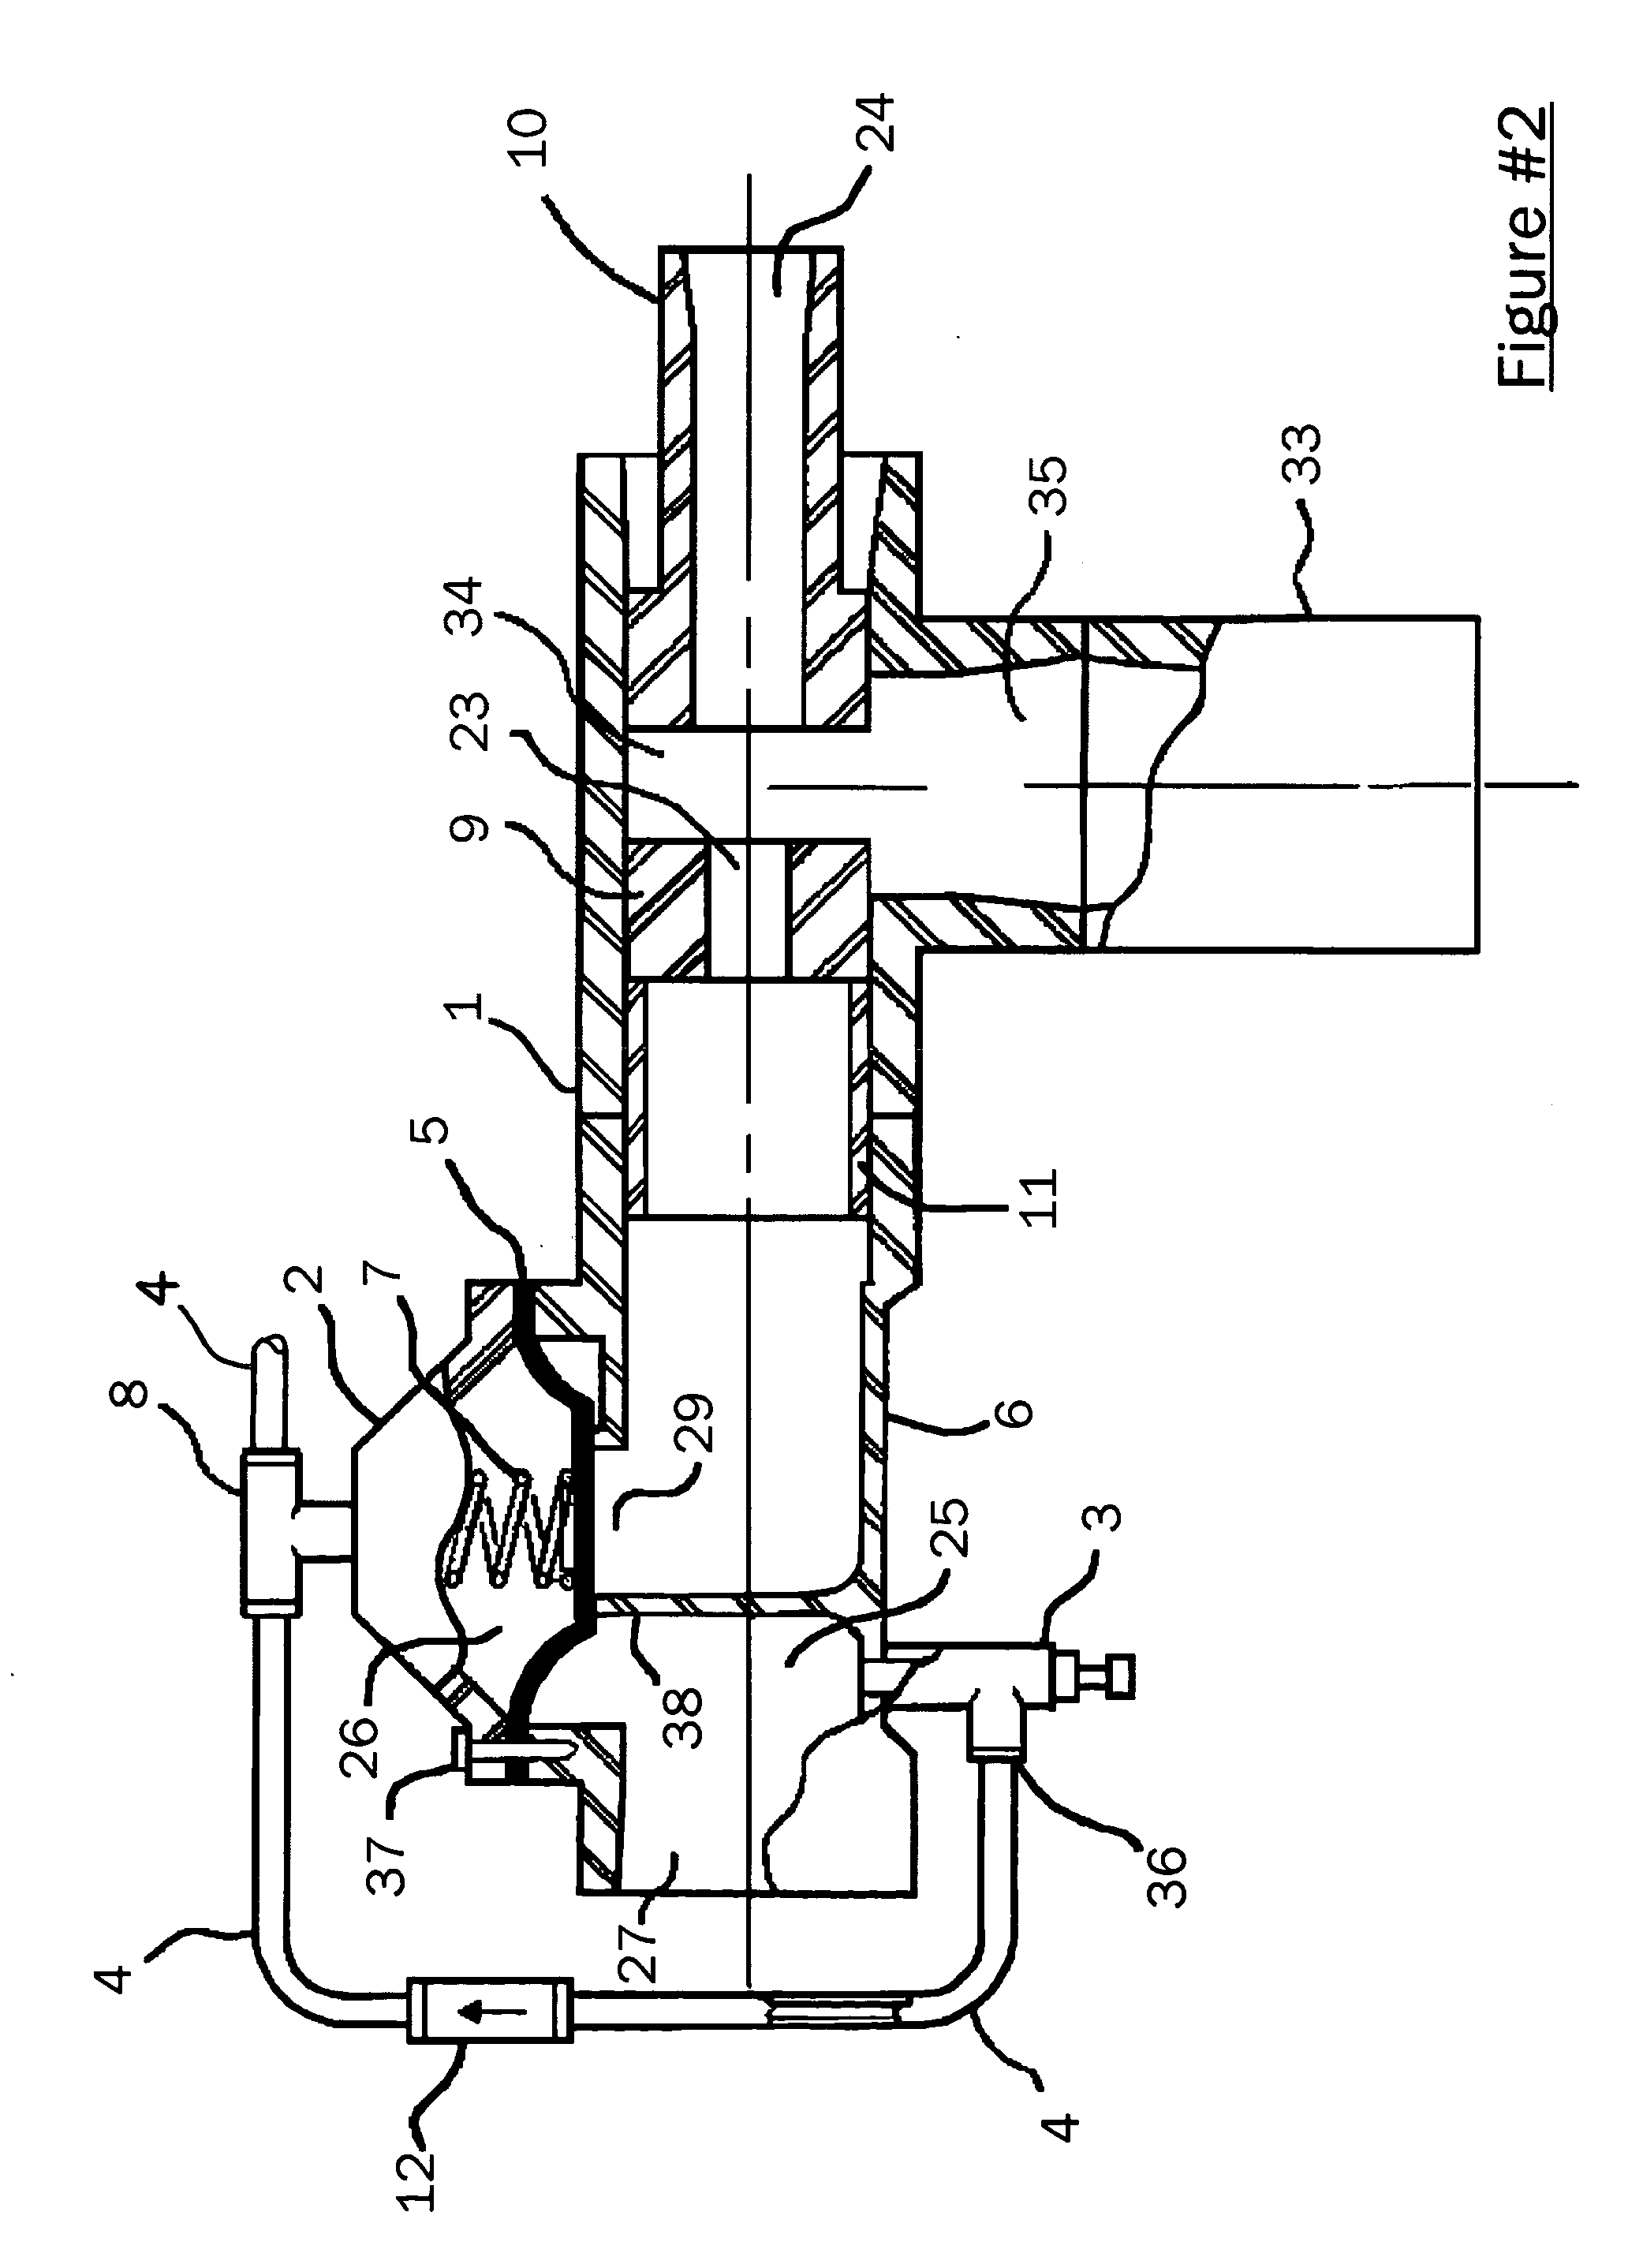 Machine for removing sump pit water and process for making same